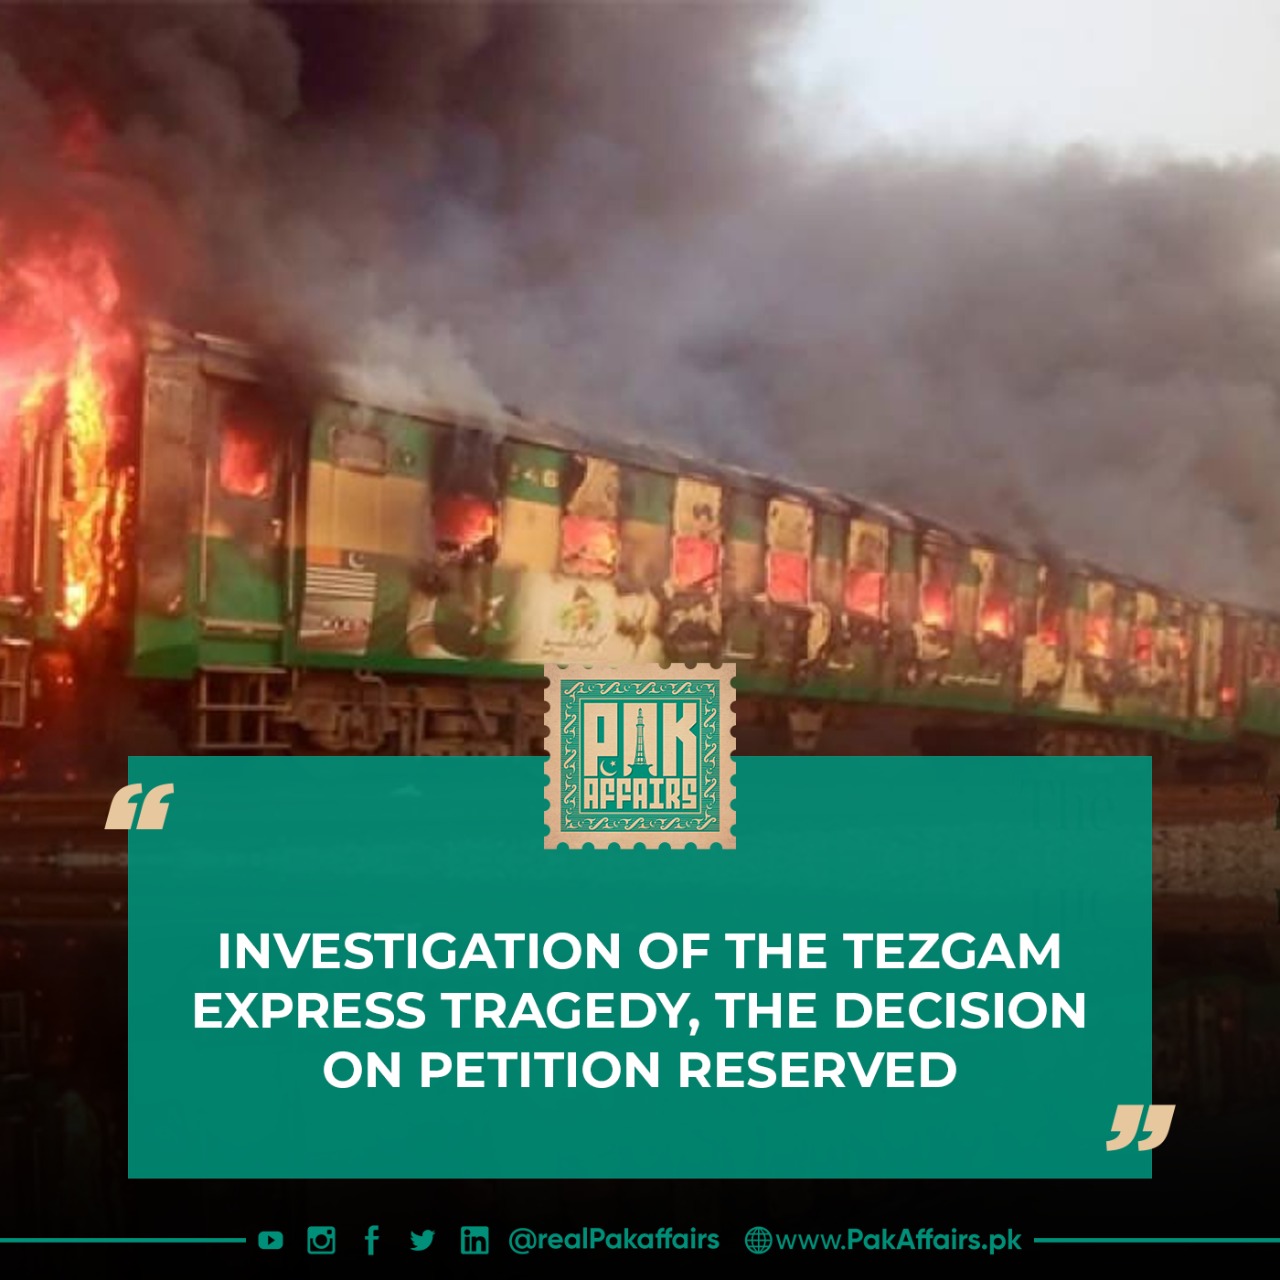 Investigation of the Tezgam Express tragedy, the decision on petition reserved